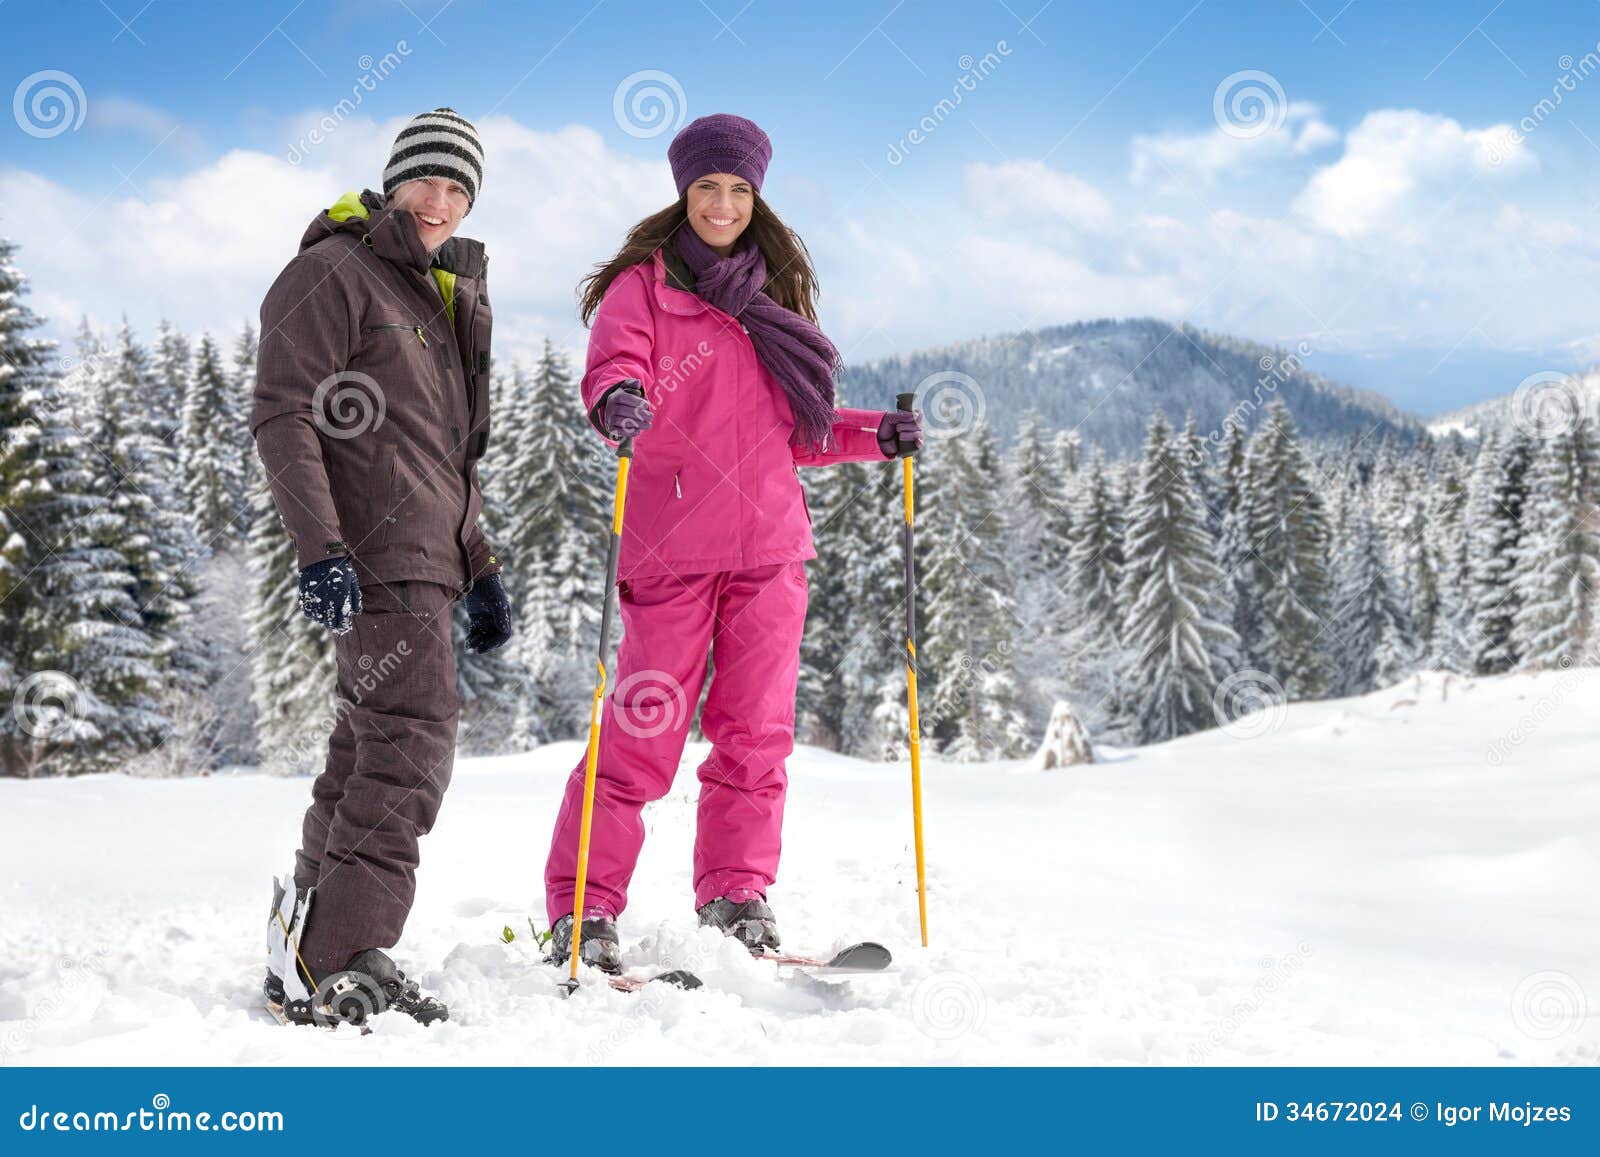 couple skiers